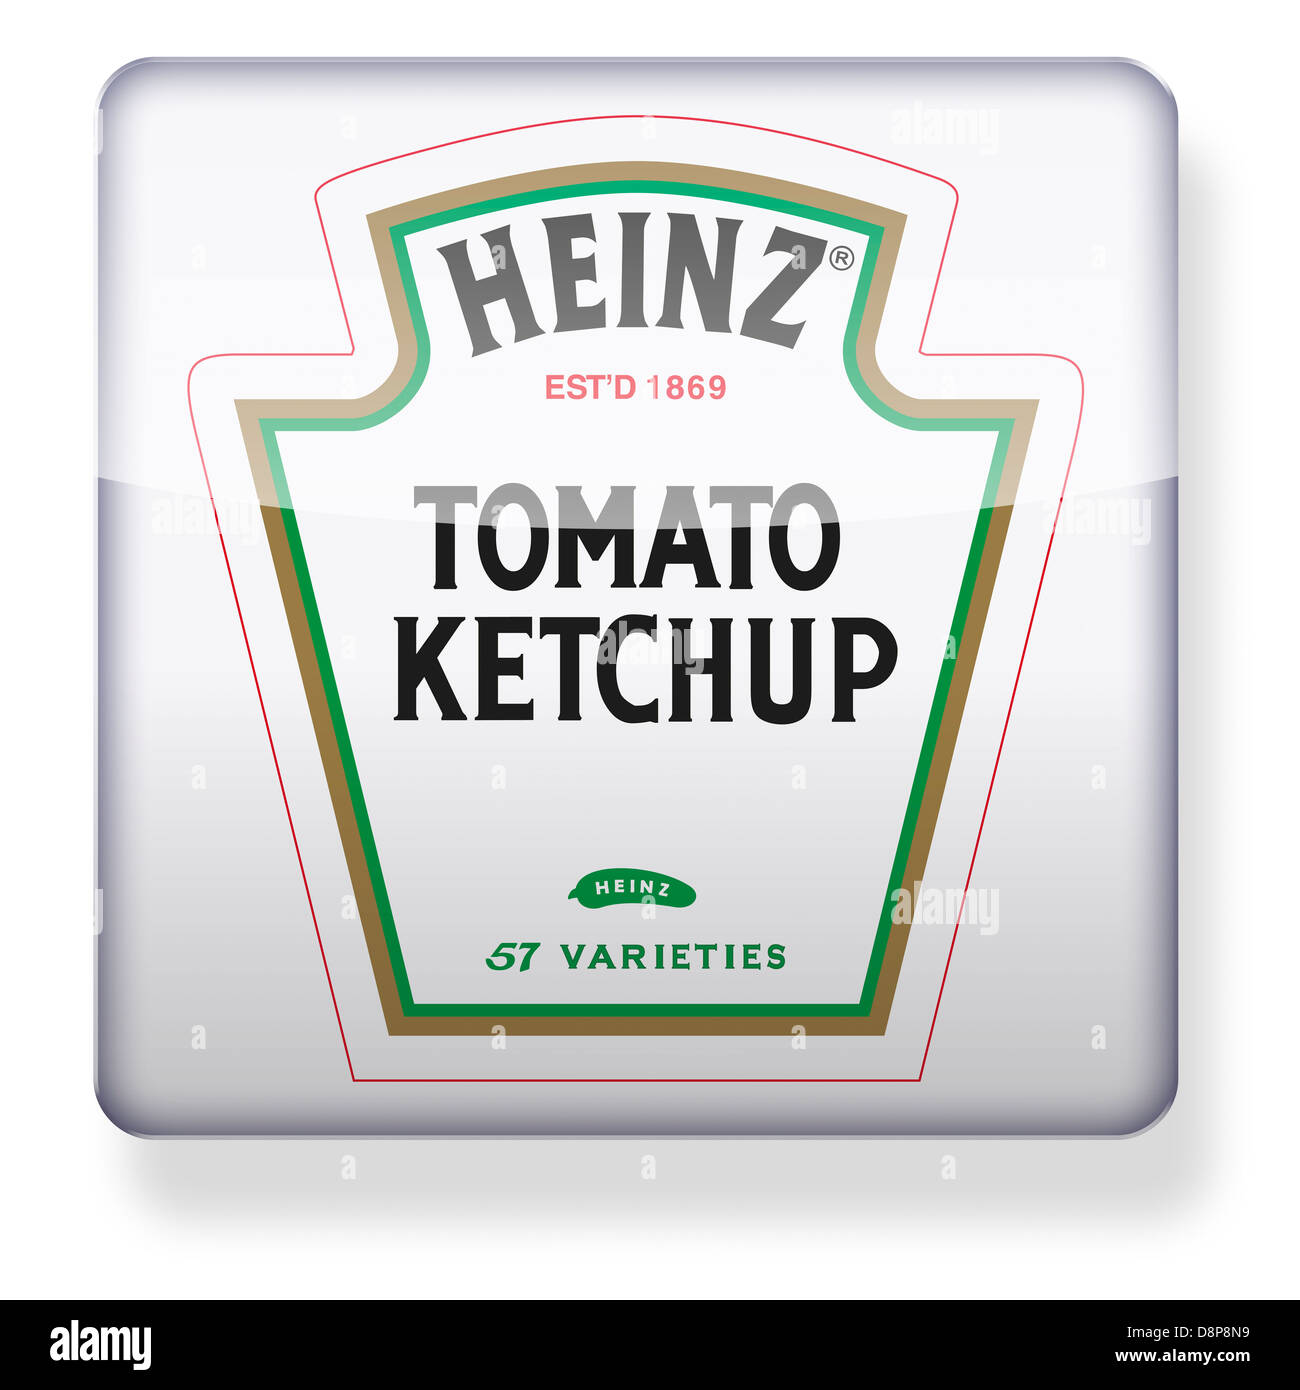 Heinz tomato ketchup logo as an app icon. Clipping path included. Stock Photo